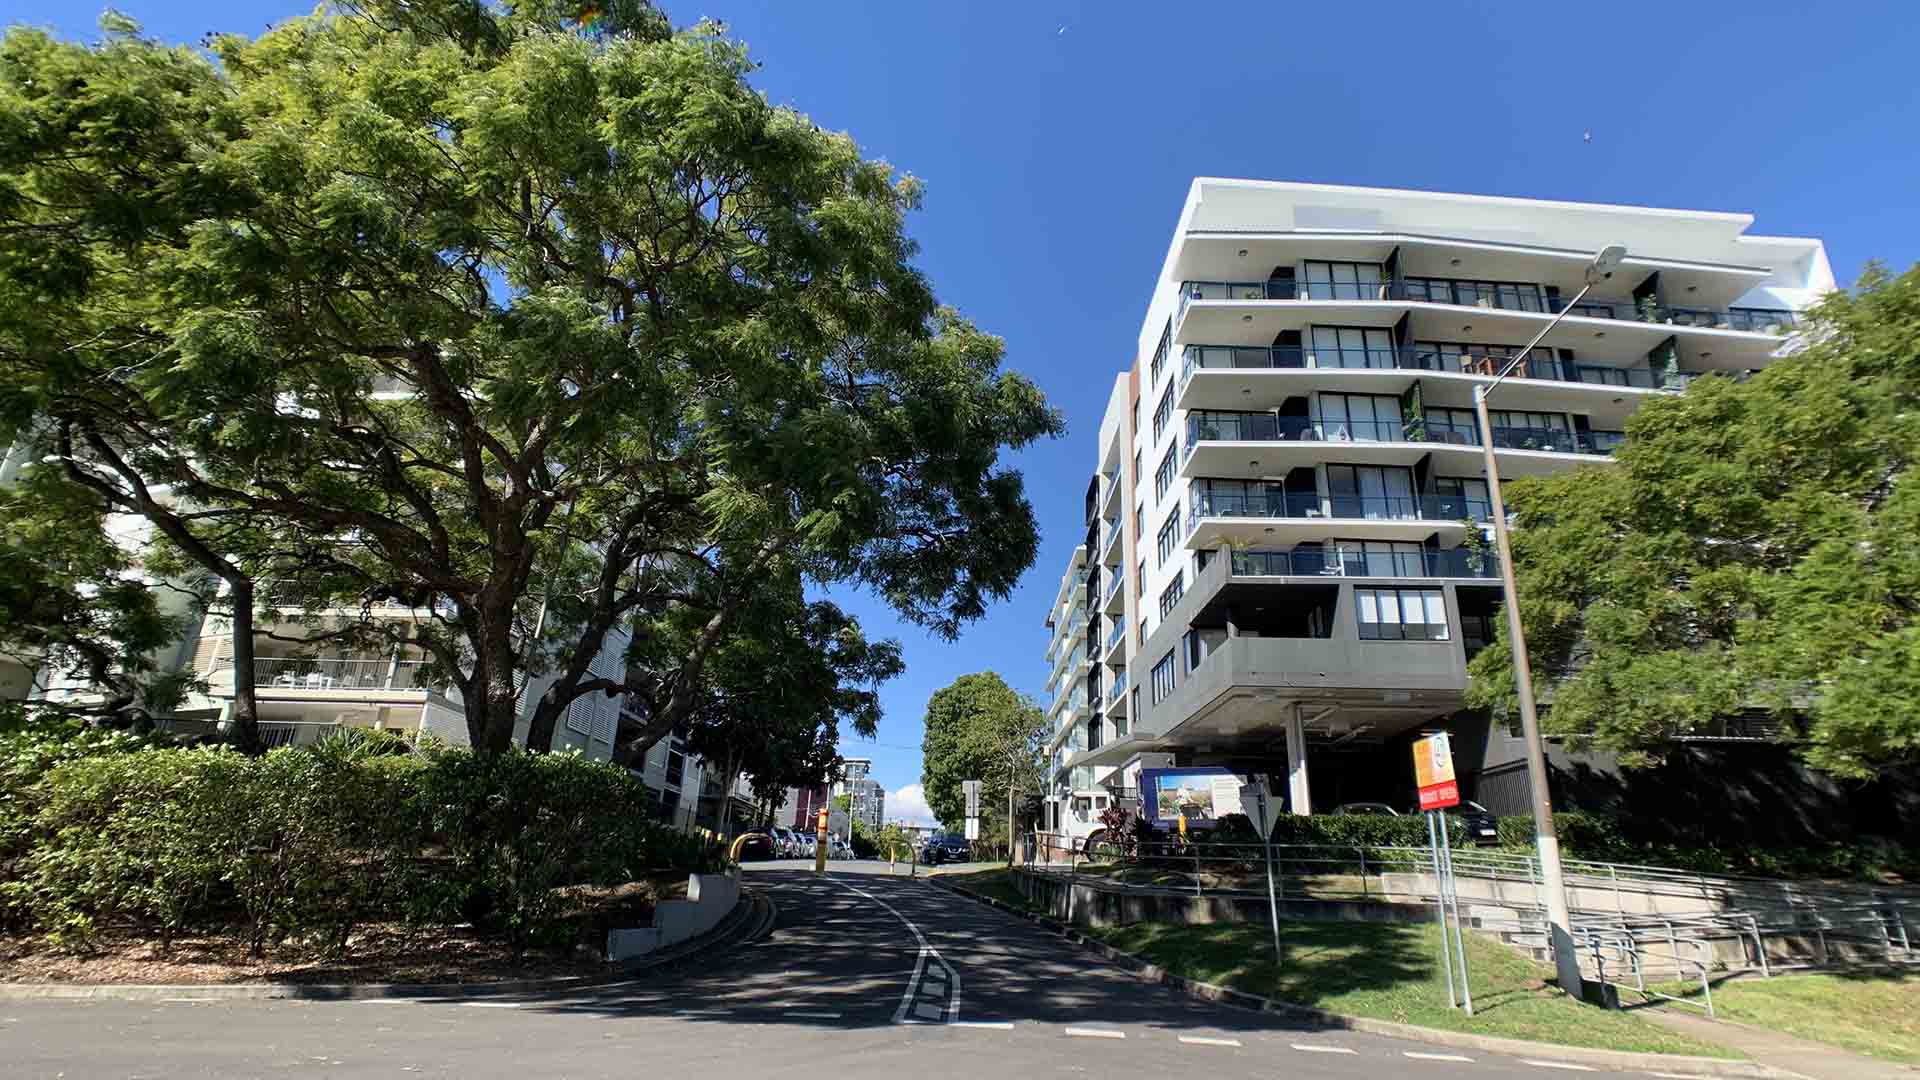 The Queensland Government Has Outlined Plans to Make Renting in Brisbane Slightly Less Painful